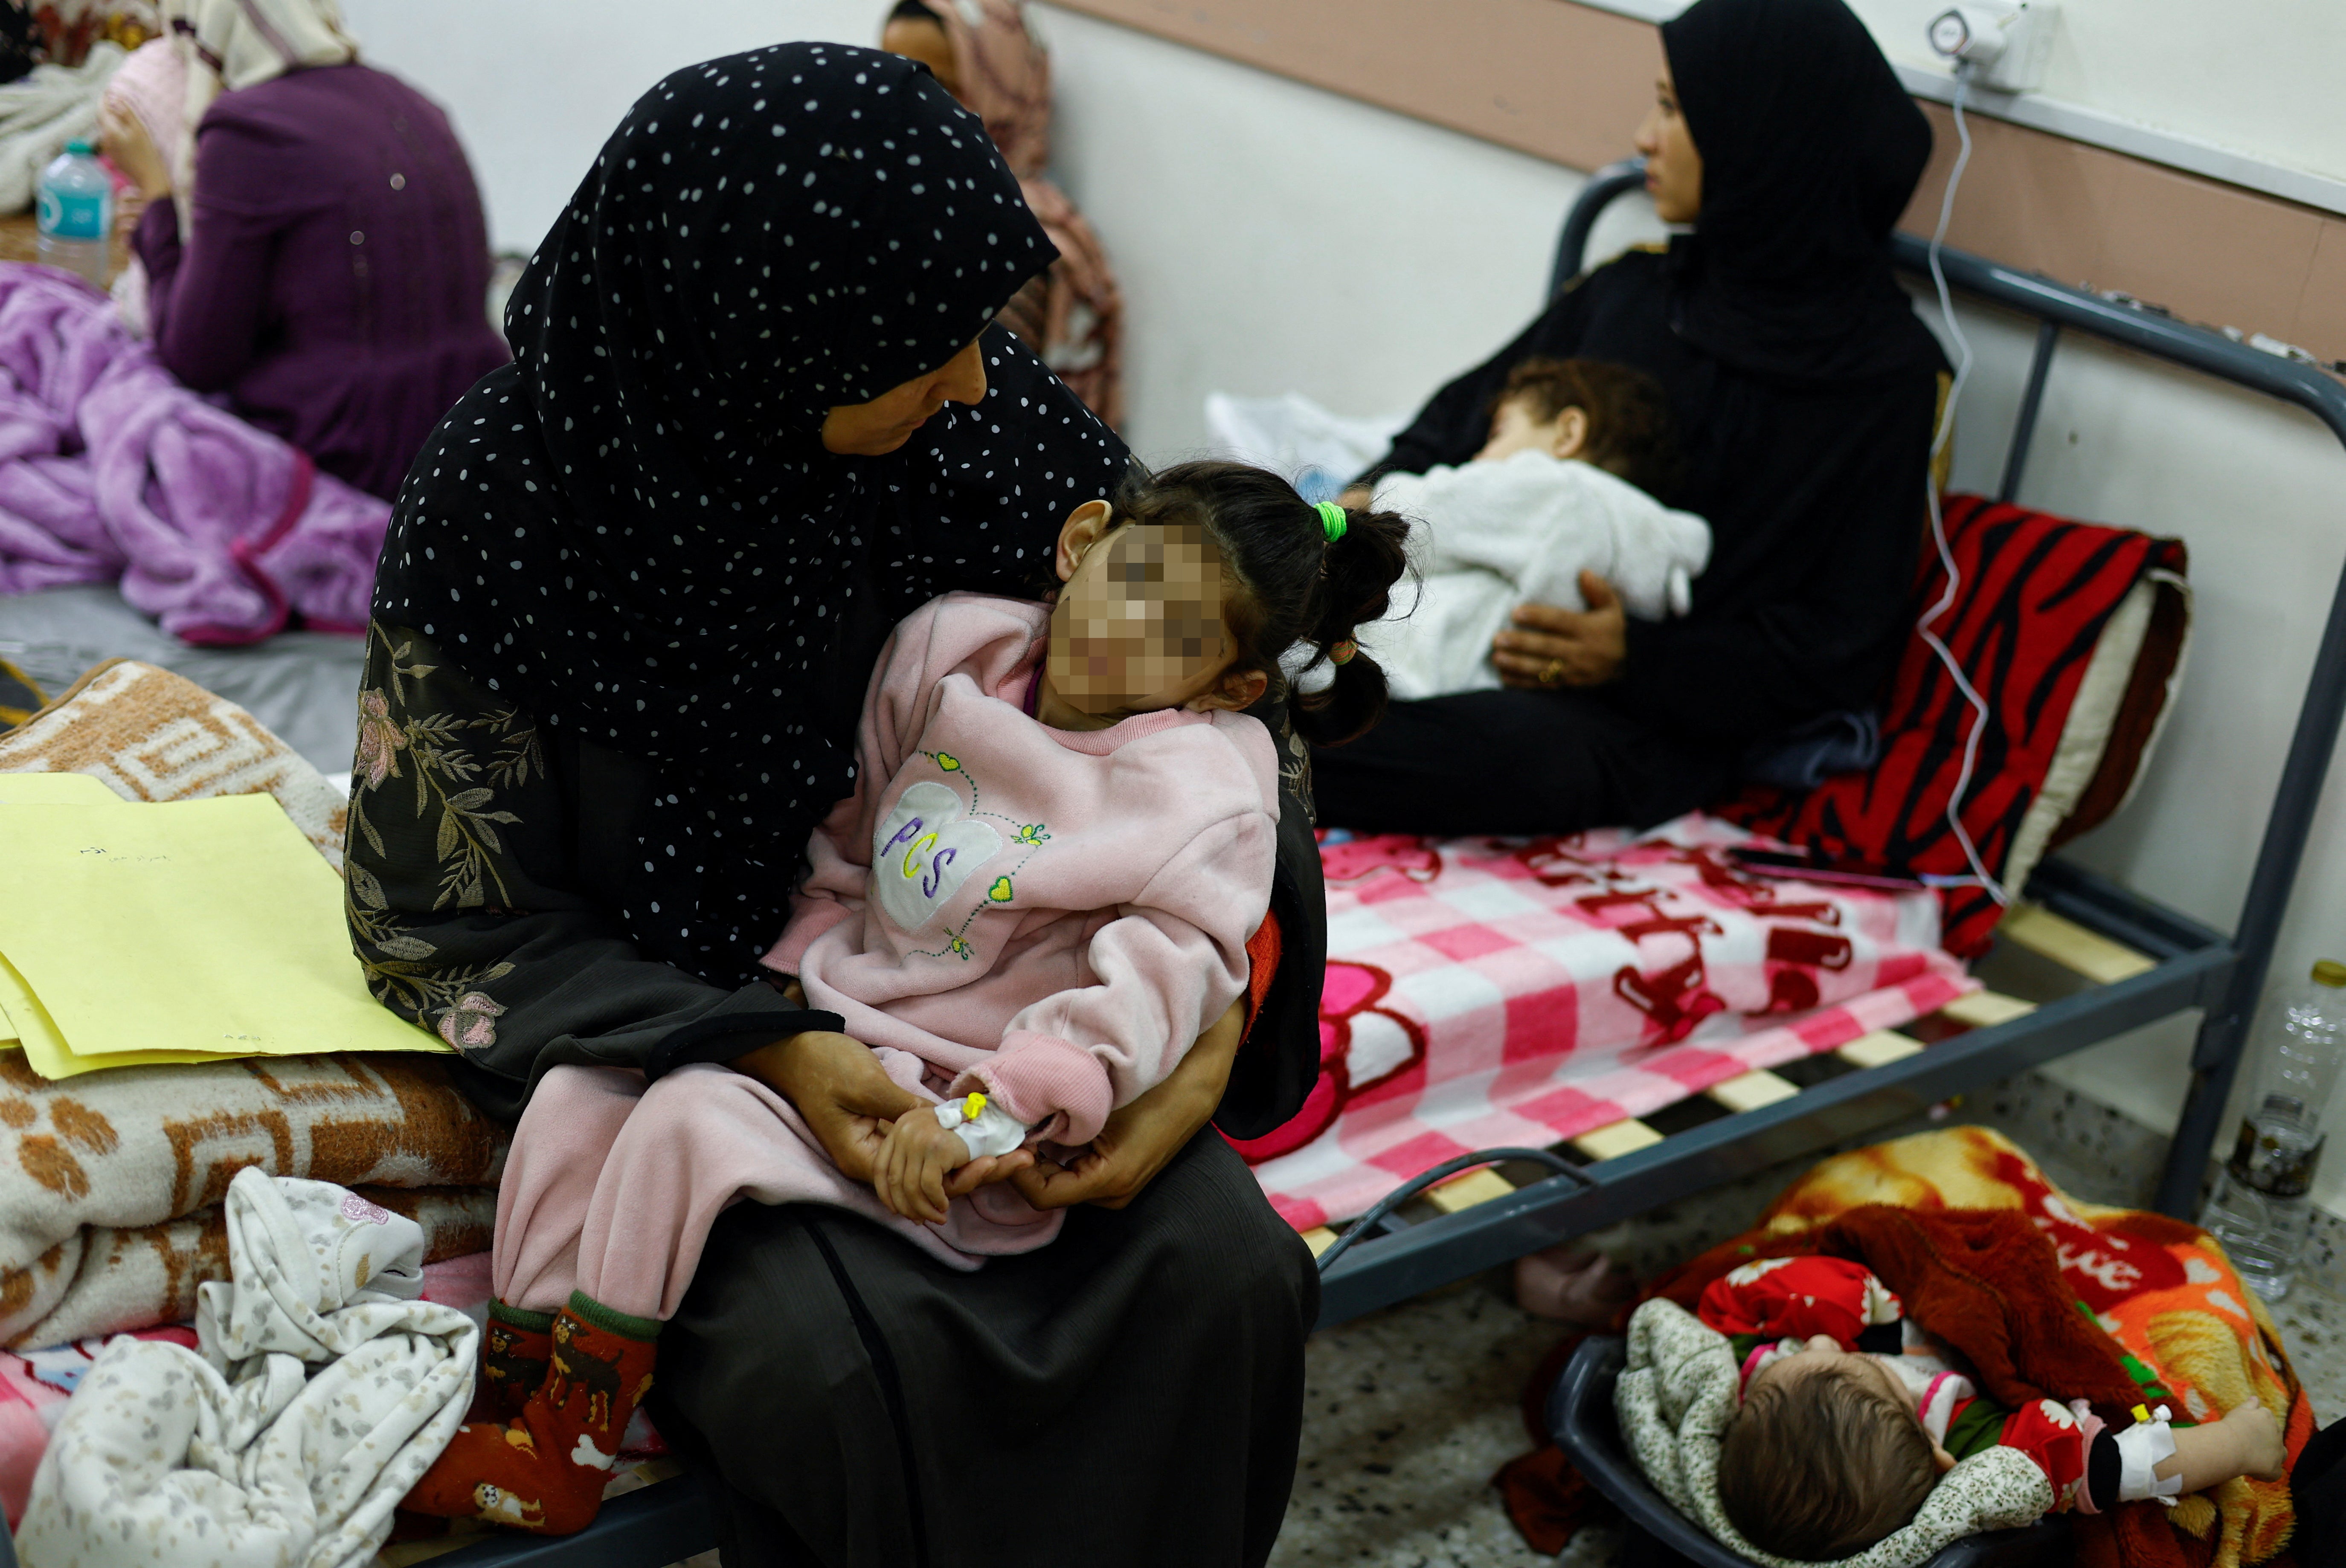 A Palestinian woman with her child in a Gaza hospital